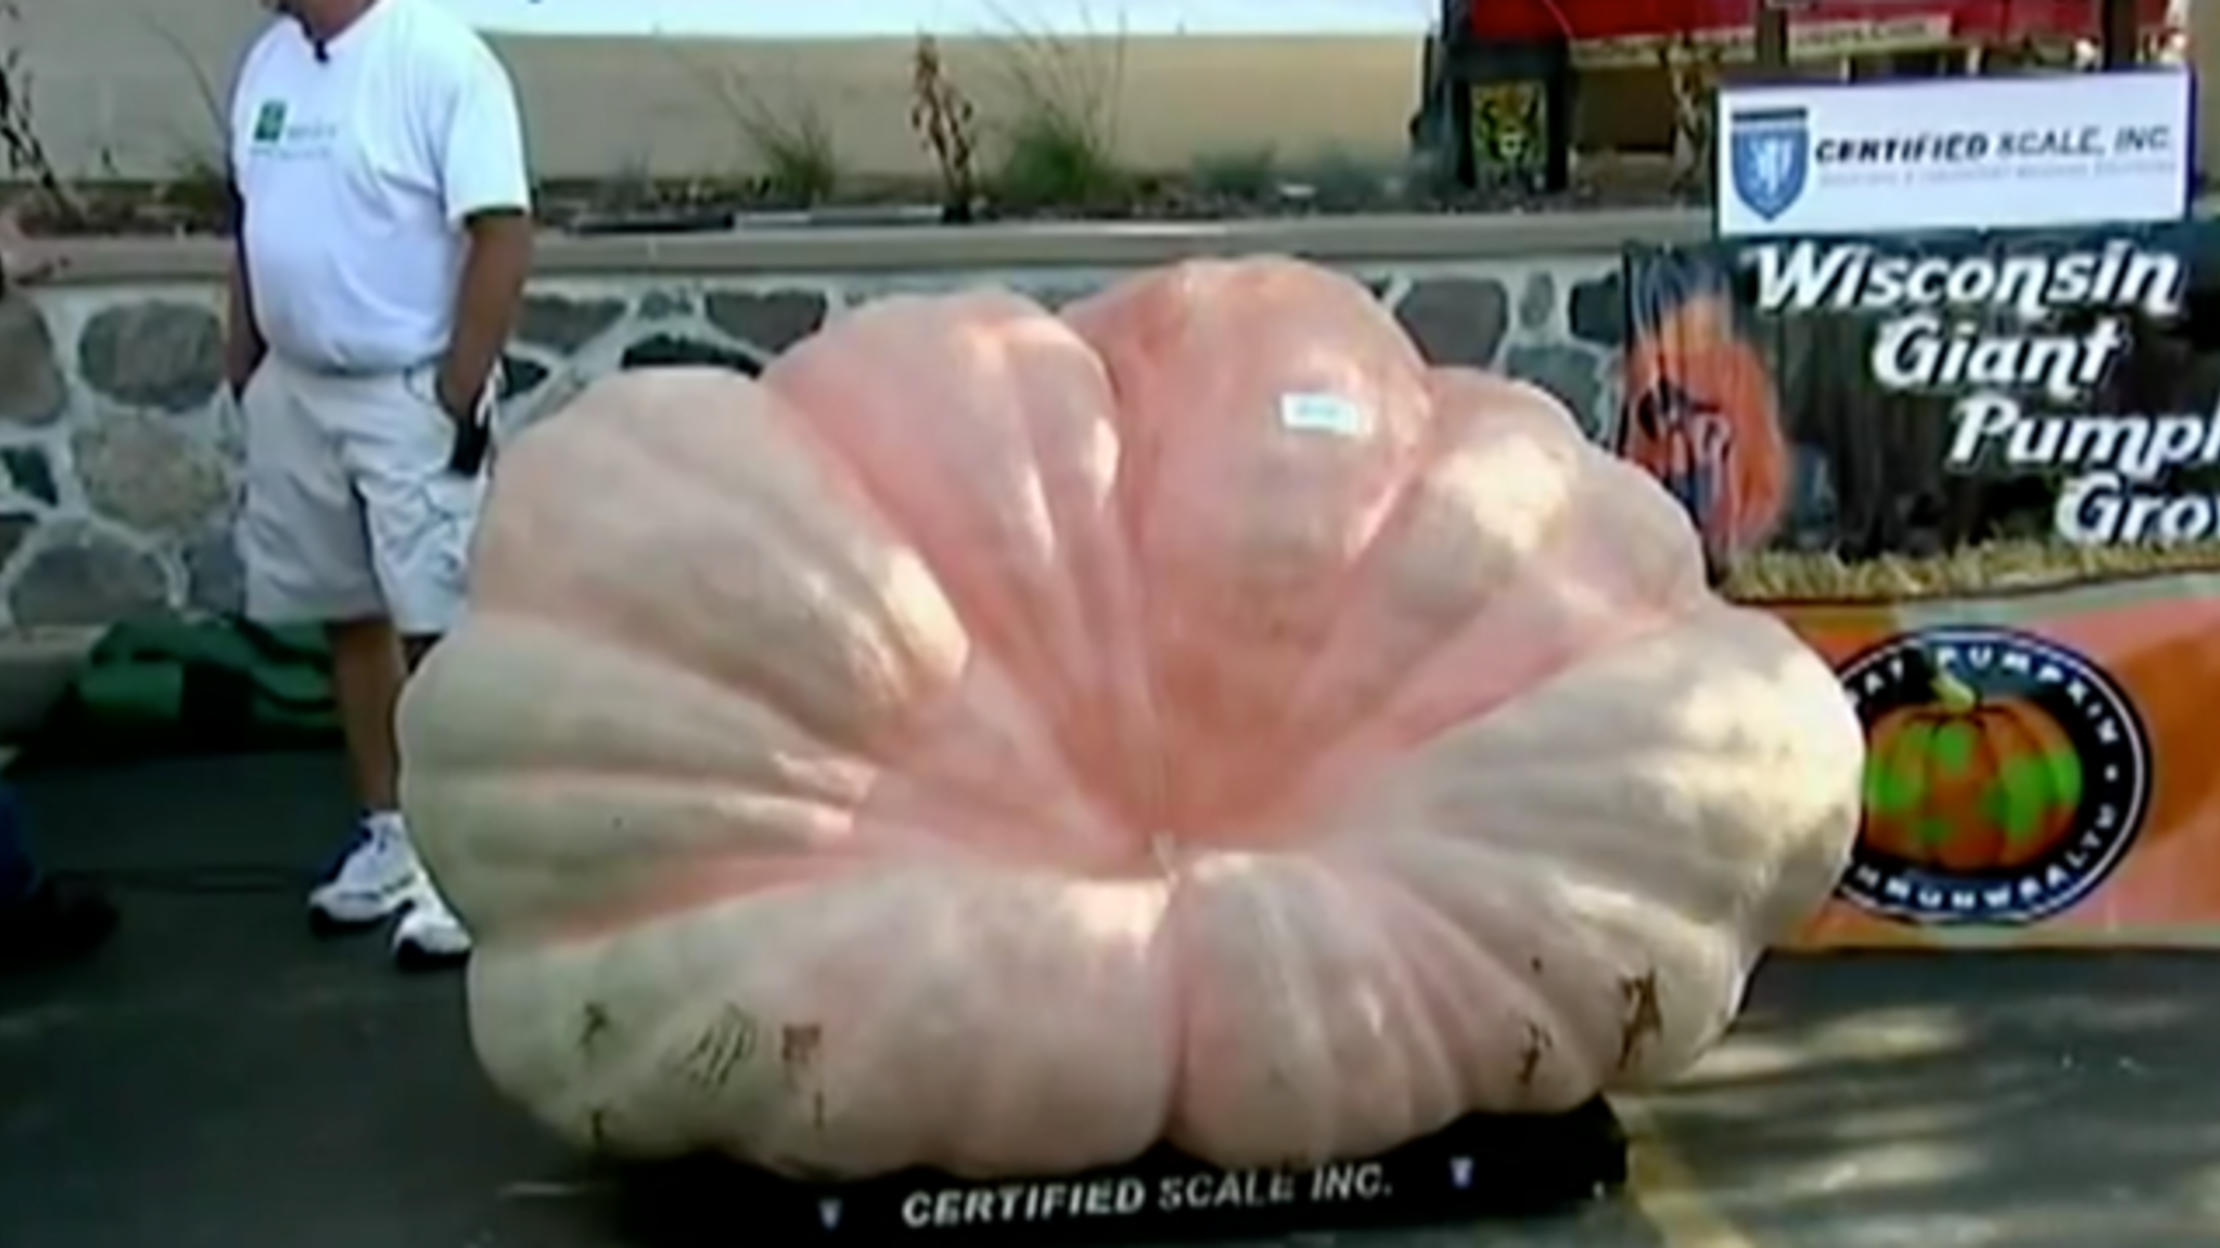 9-of-the-world-s-biggest-holiday-items-world-s-largest-pumpkin